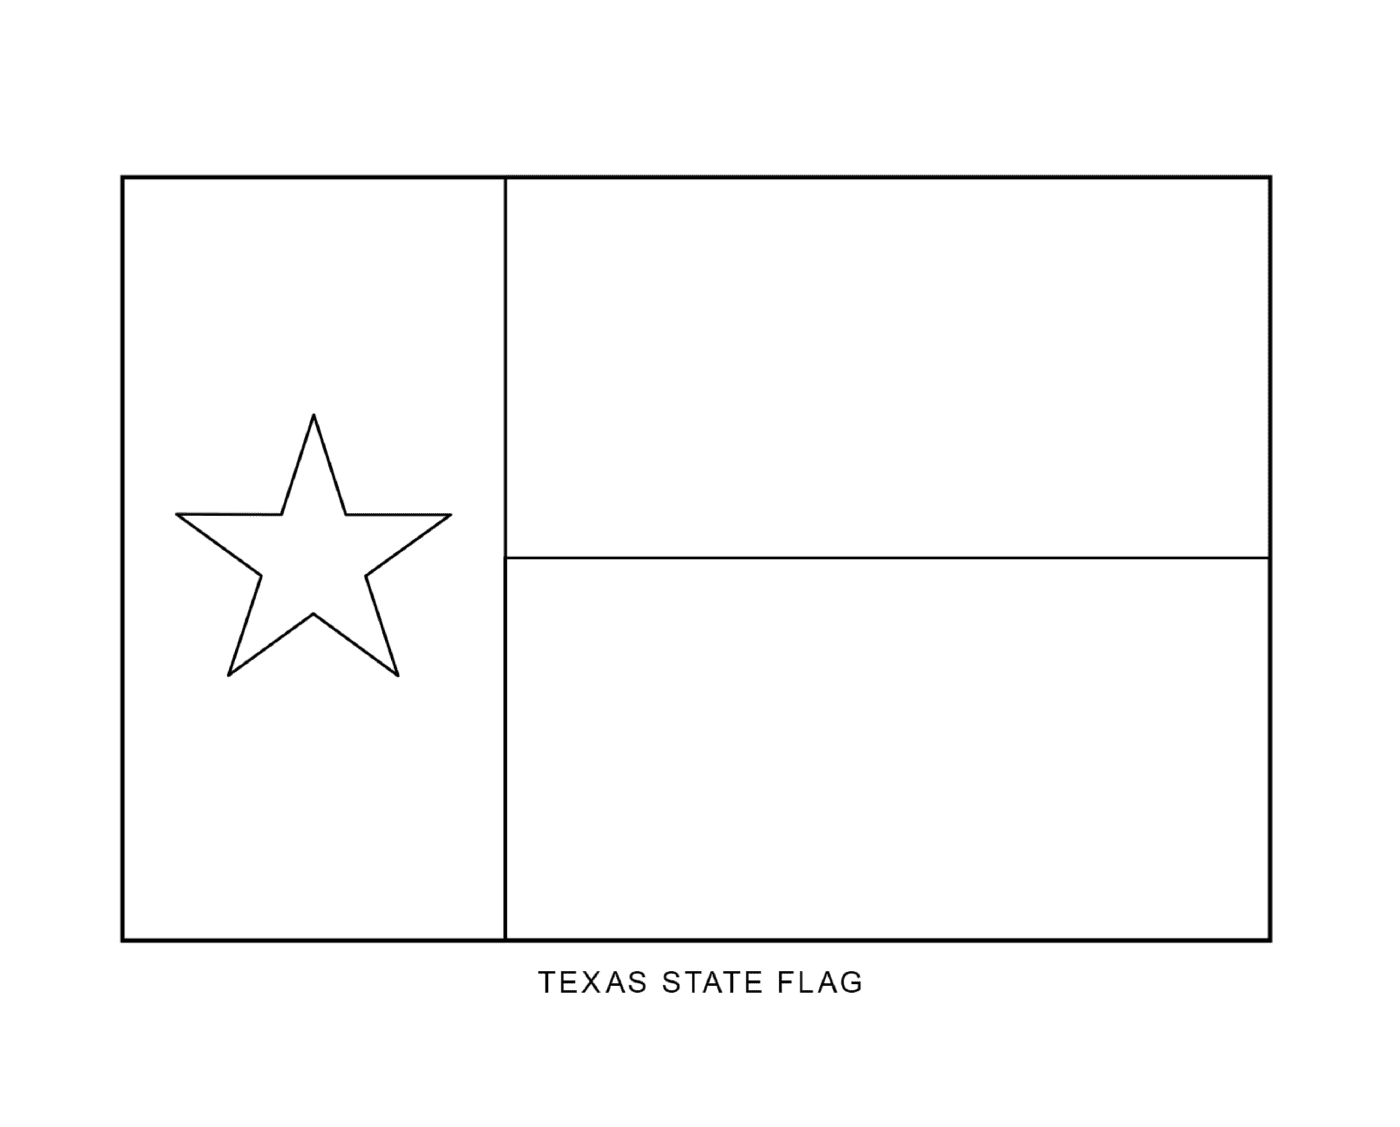  Texas State Flag in Black and White 